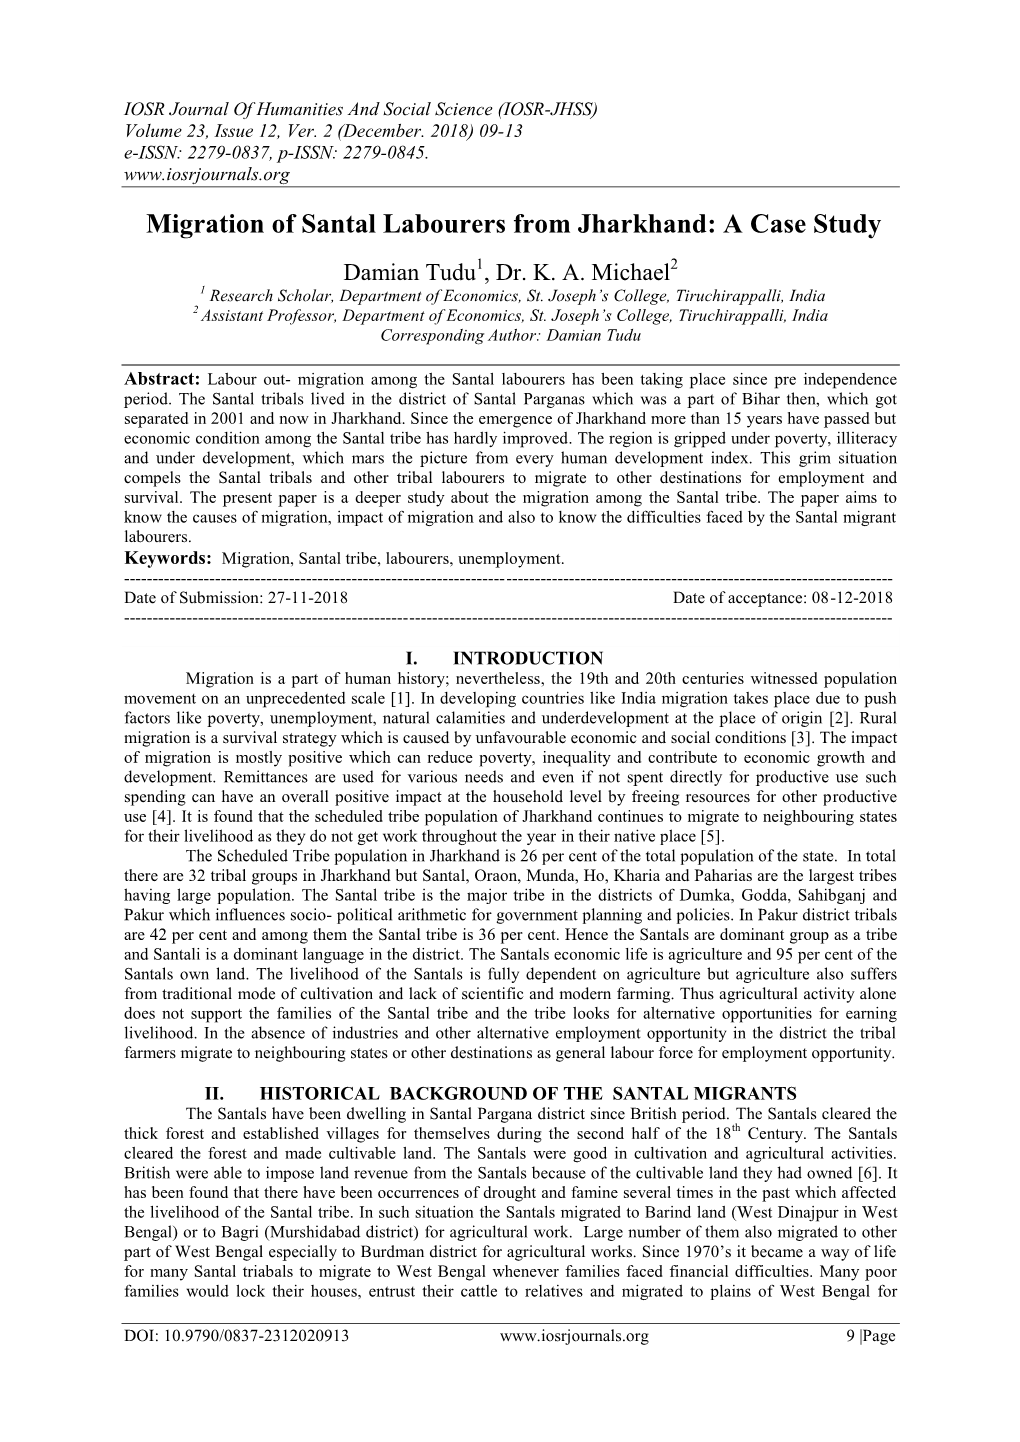 Migration of Santal Labourers from Jharkhand: a Case Study